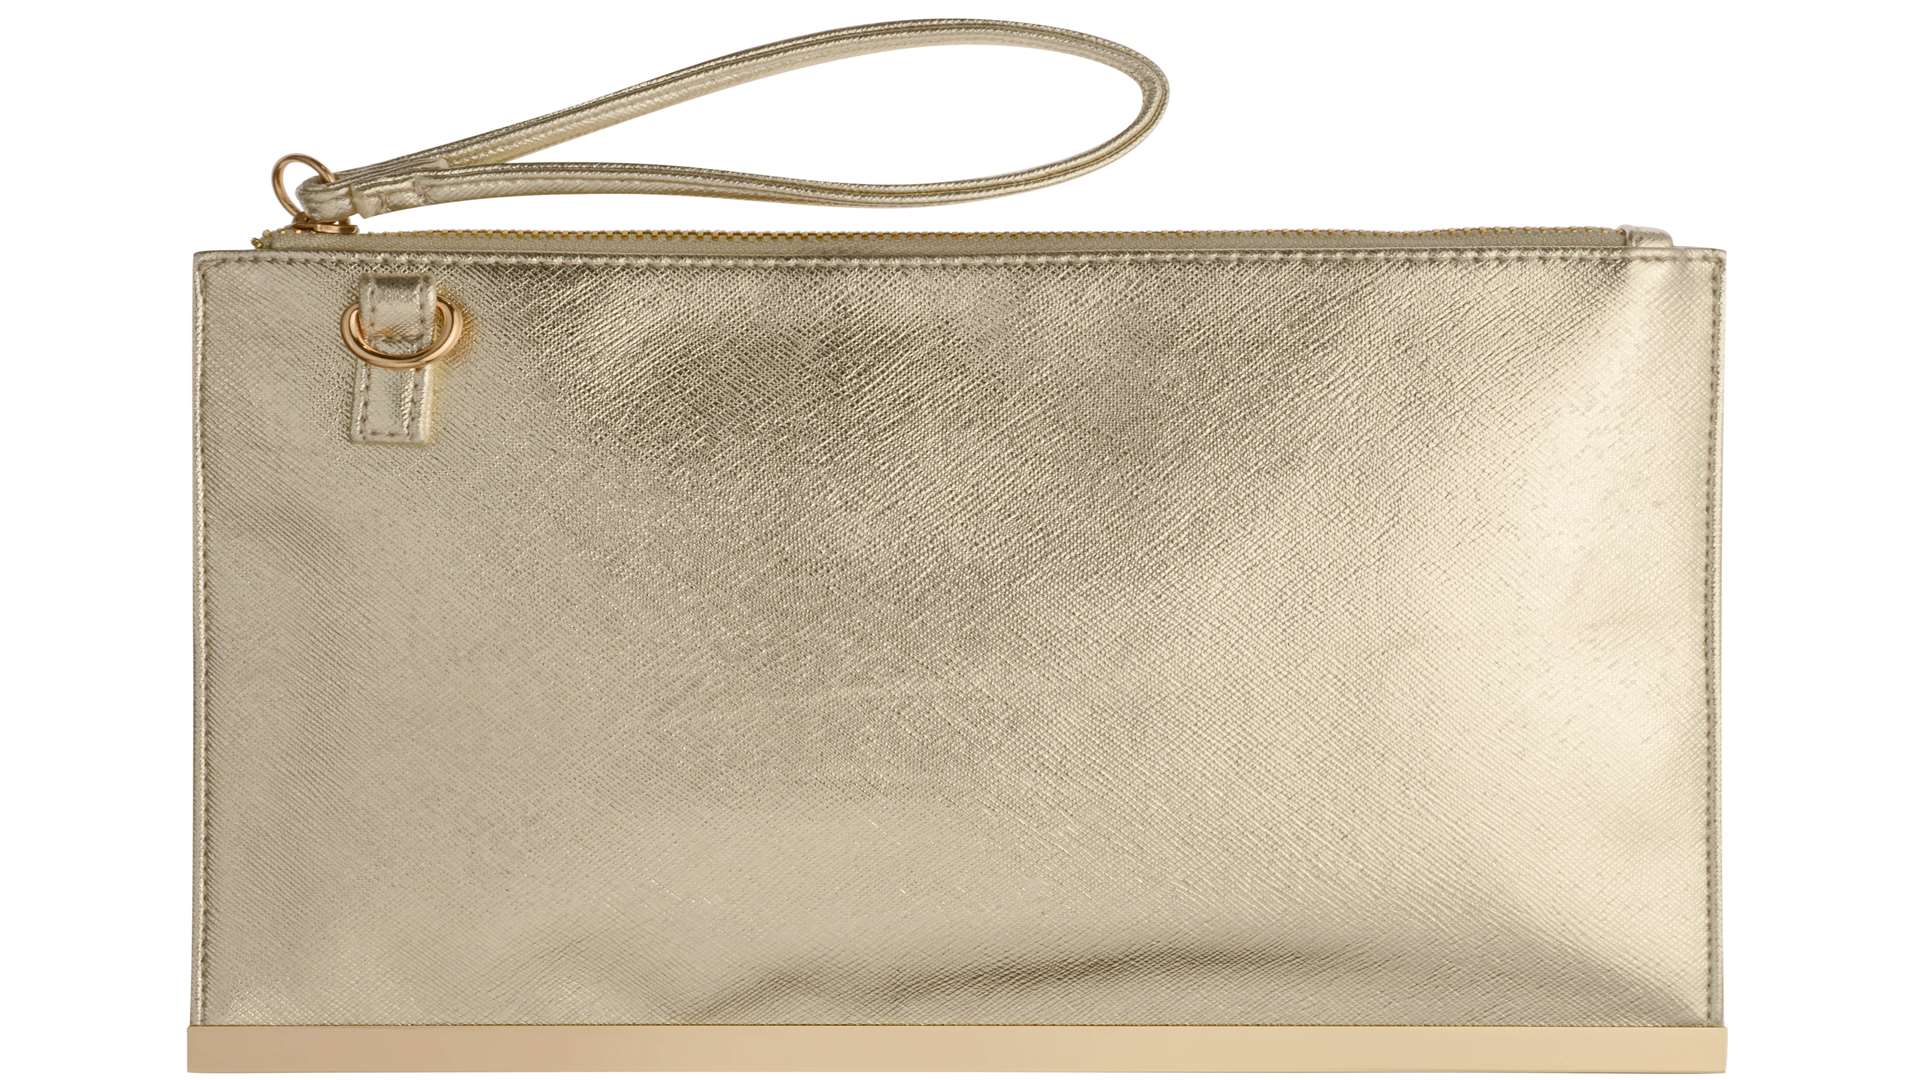 FOR HER: Look the part with this gold clutch bag. £14 from BHS